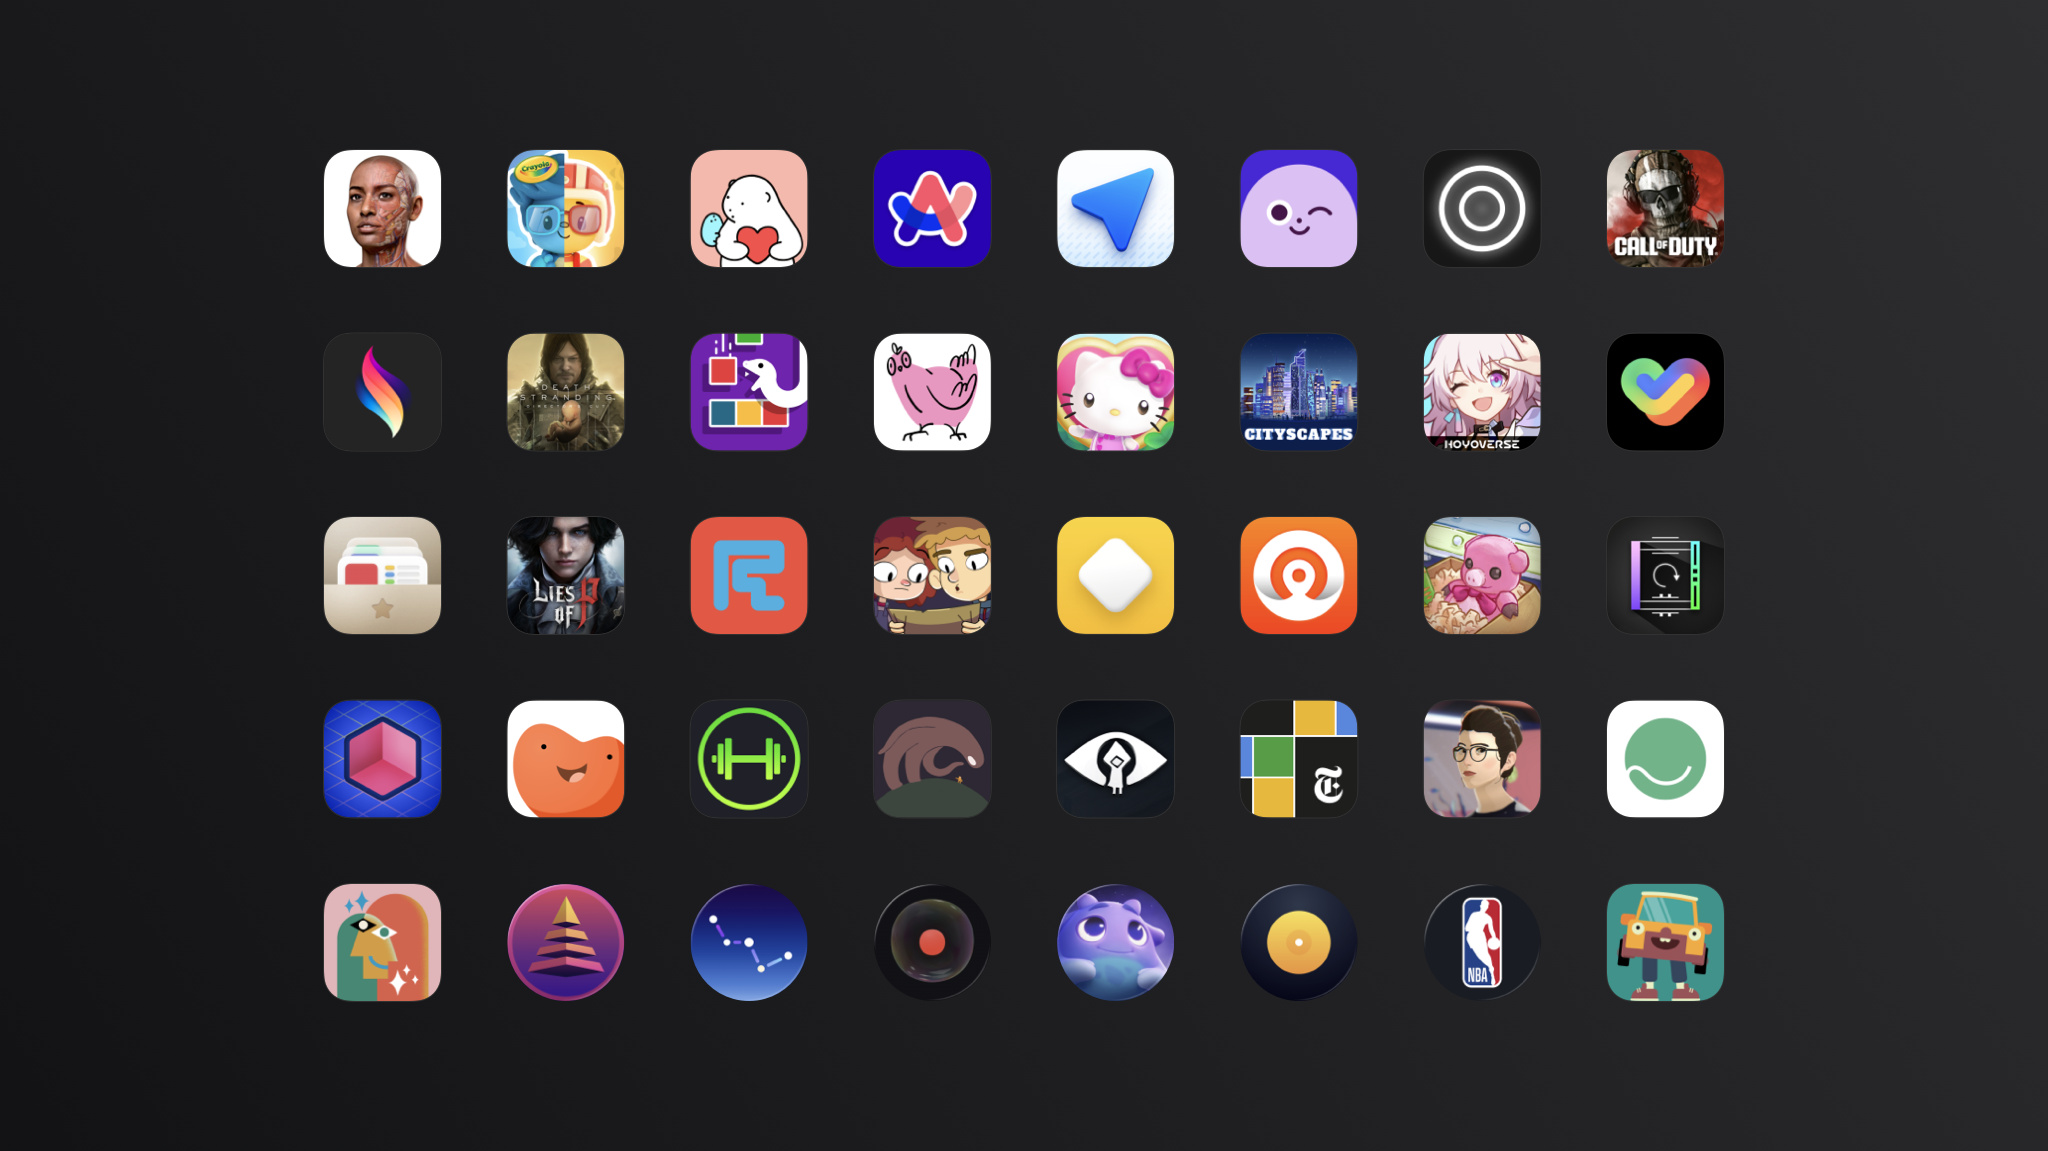 A collage of app icons from the 40 Apple Design Award finalists, set against a black background.